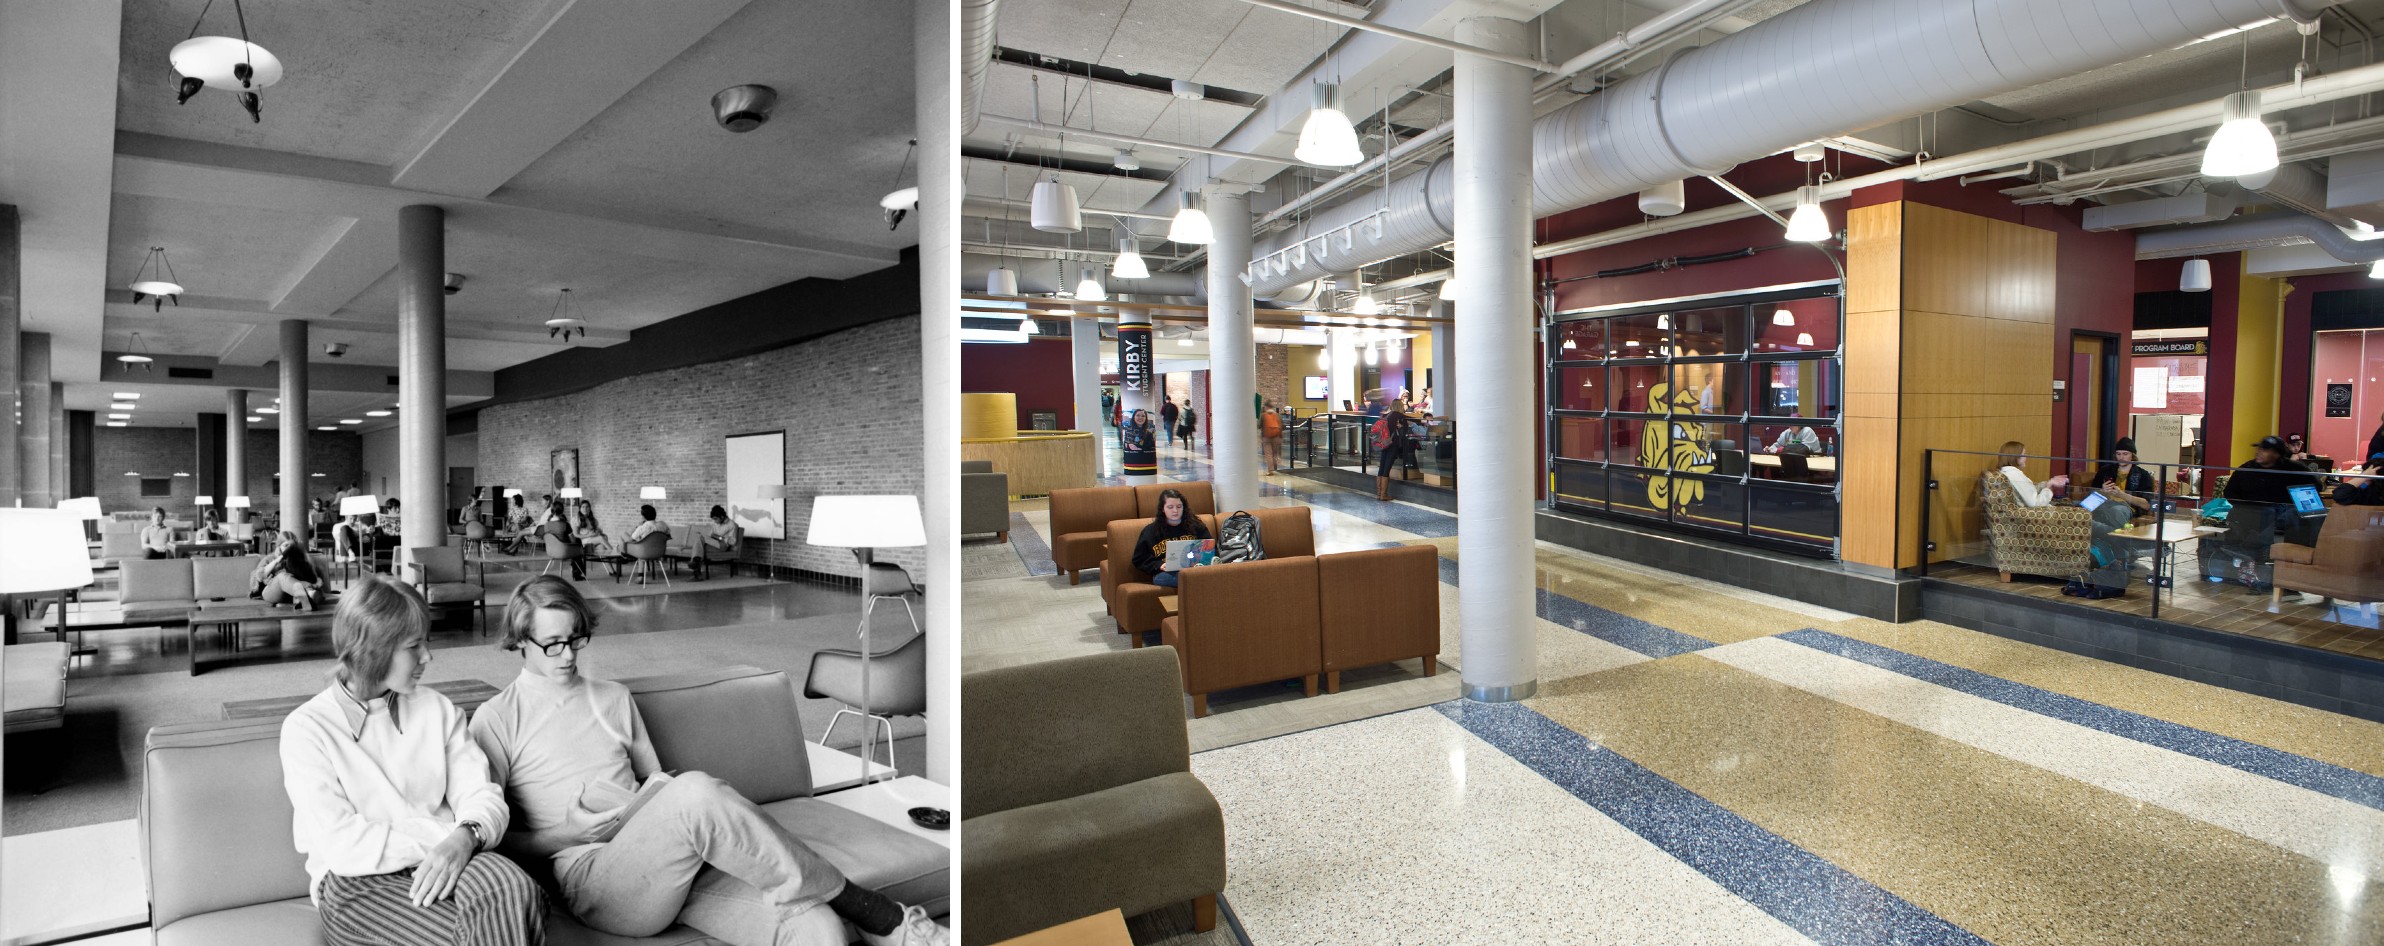 Two photos side by side of Kirby Student Center, one in the 1970s and one in the present day.